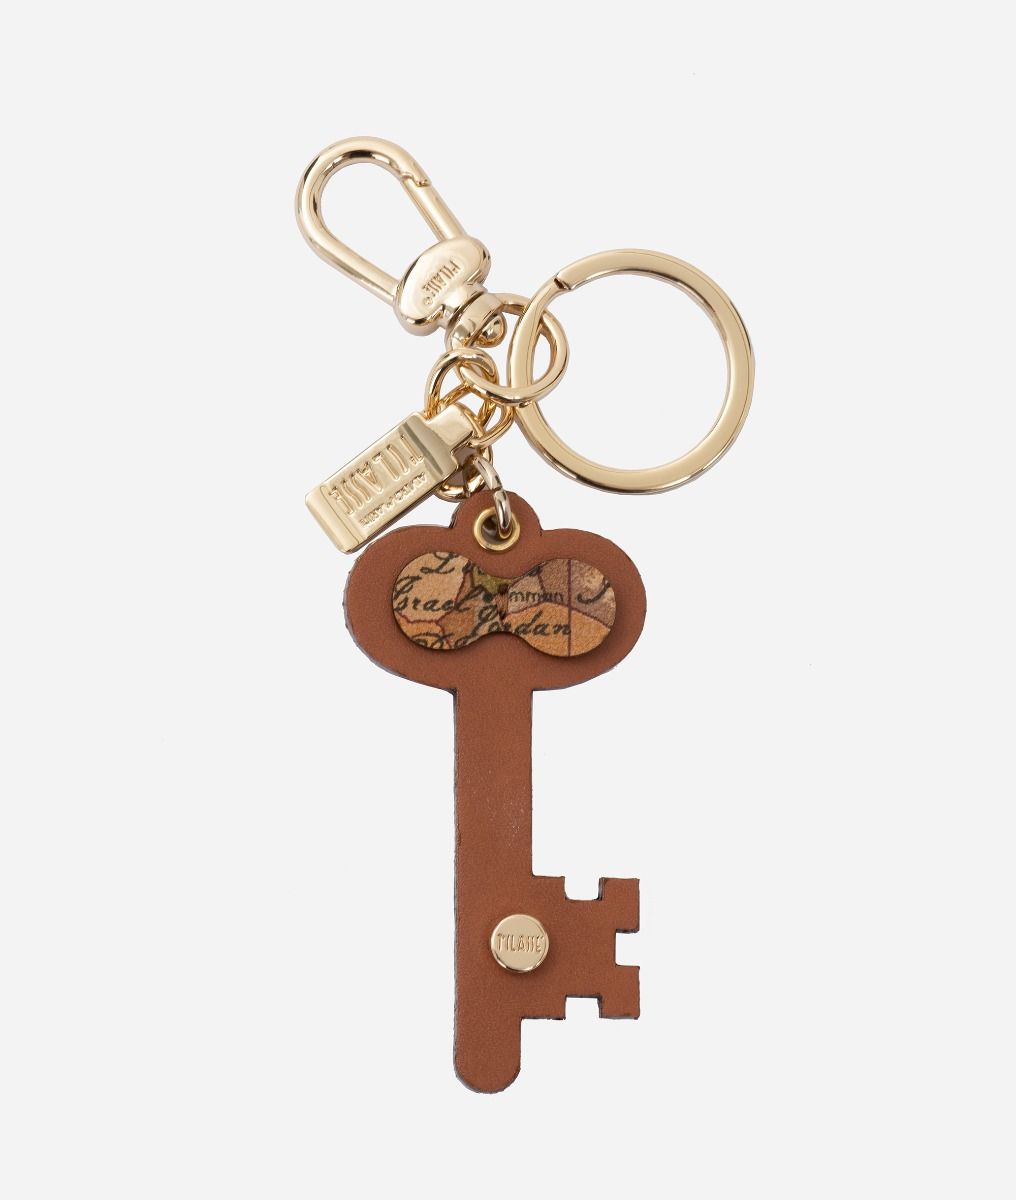 Geo Classic Antique Key keychain,front